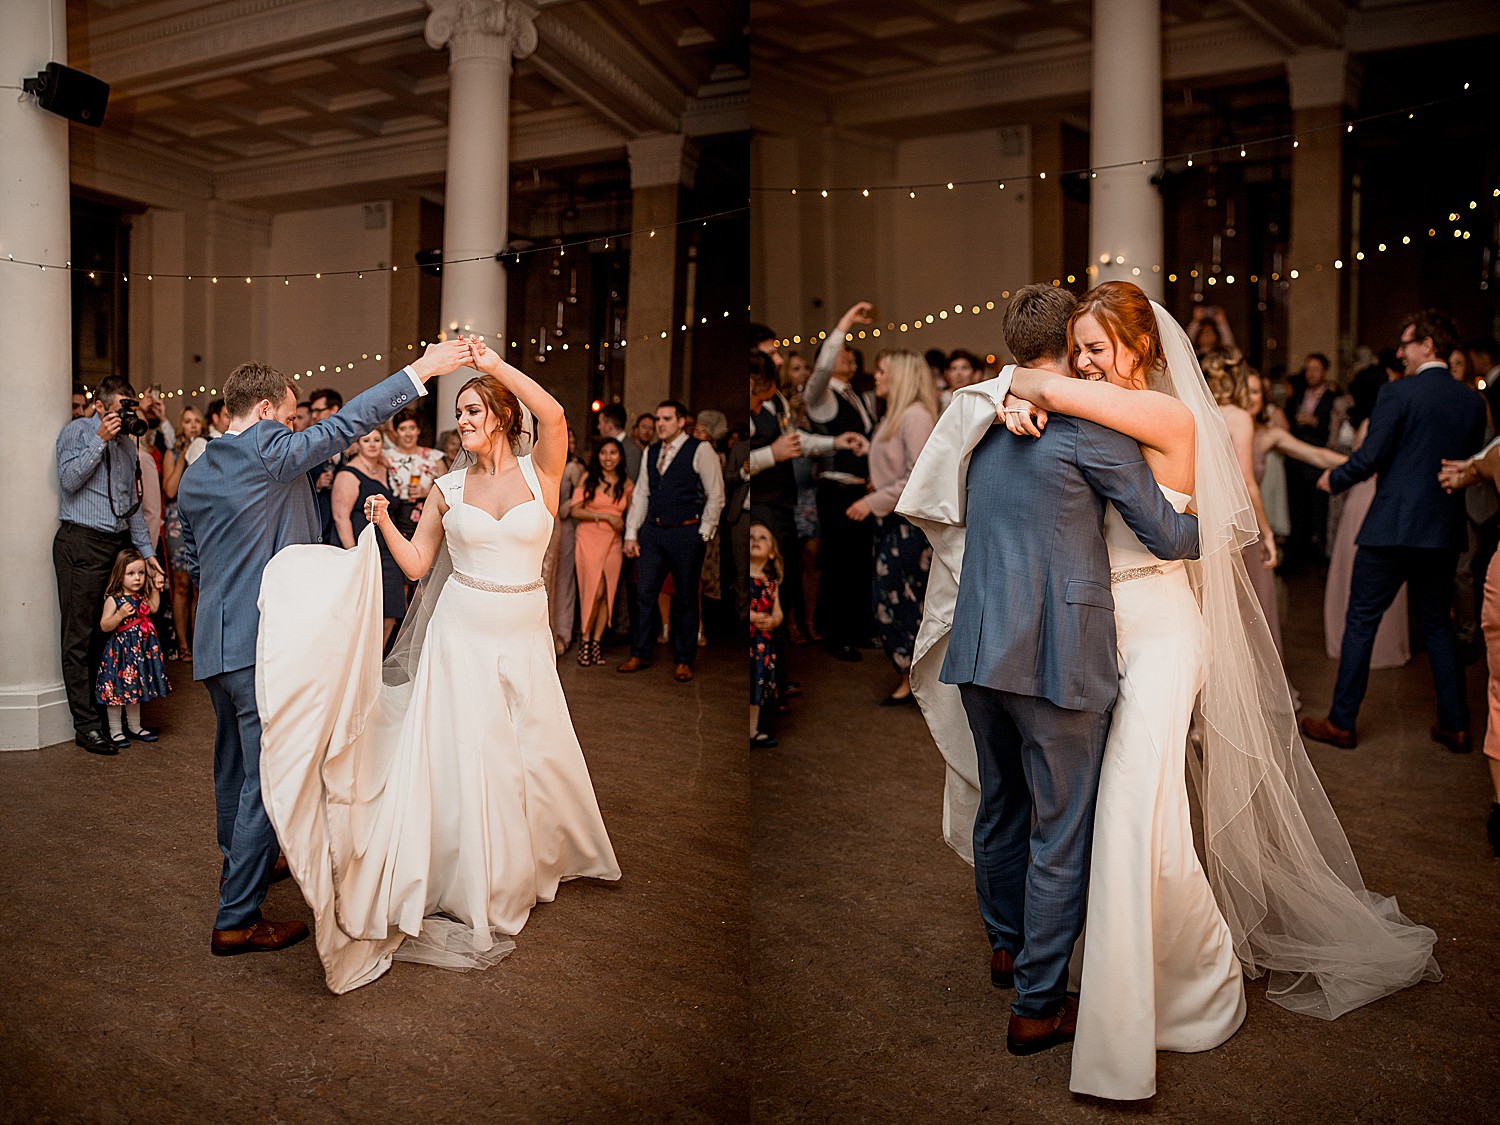 First dance at this LIverpool wedding